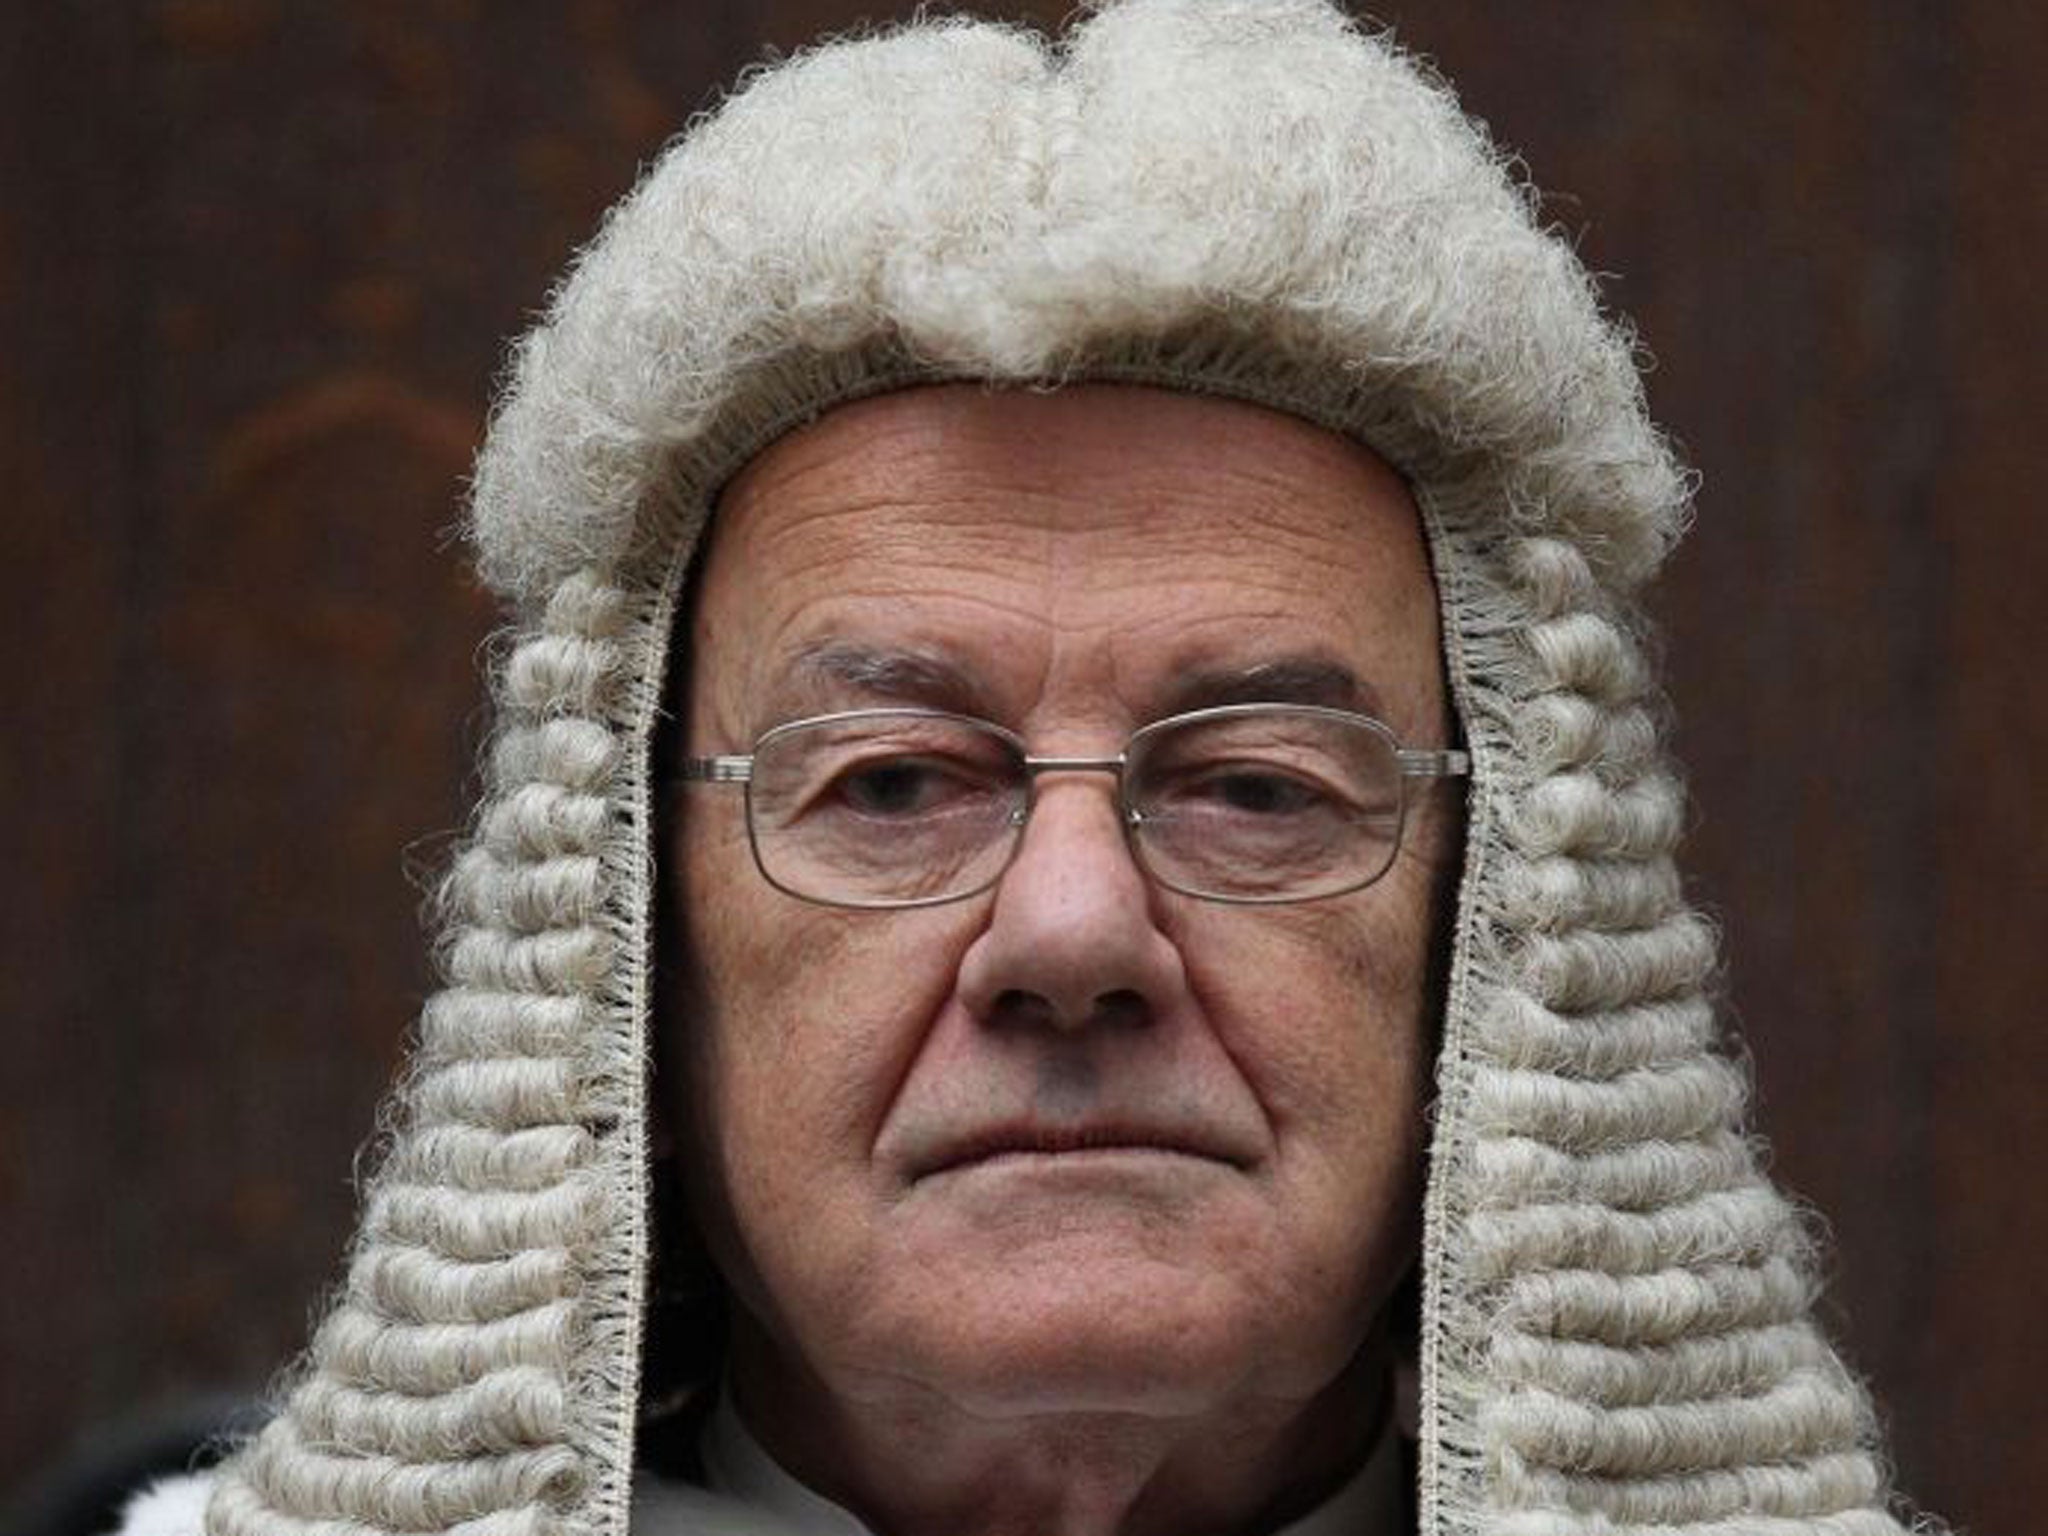 Lord Judge said recent cases may reduce prospects of a conviction in genuine cases